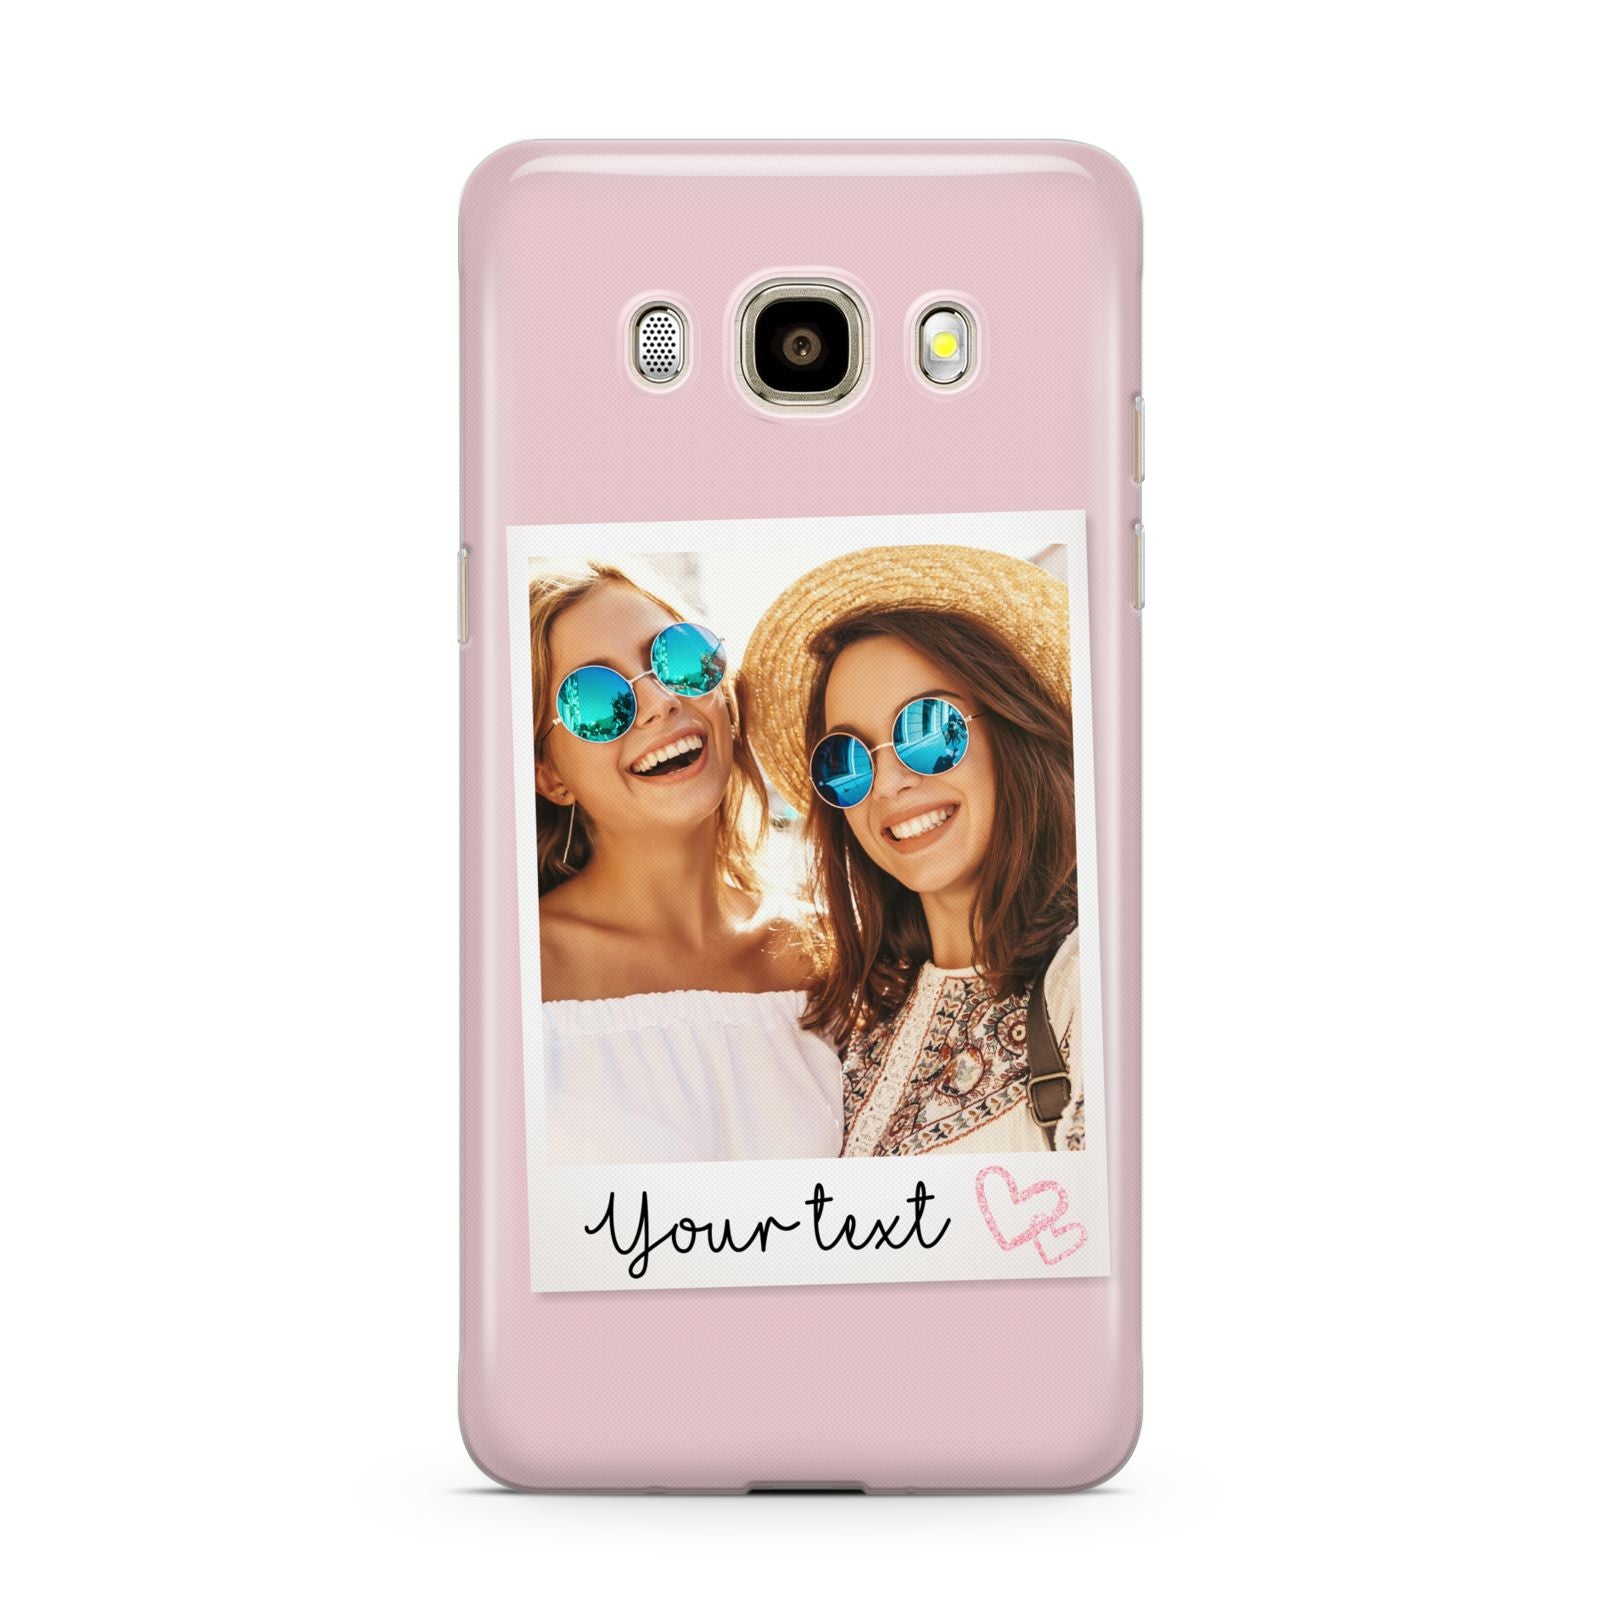 Personalised Best Friend Photo Samsung Galaxy J7 2016 Case on gold phone